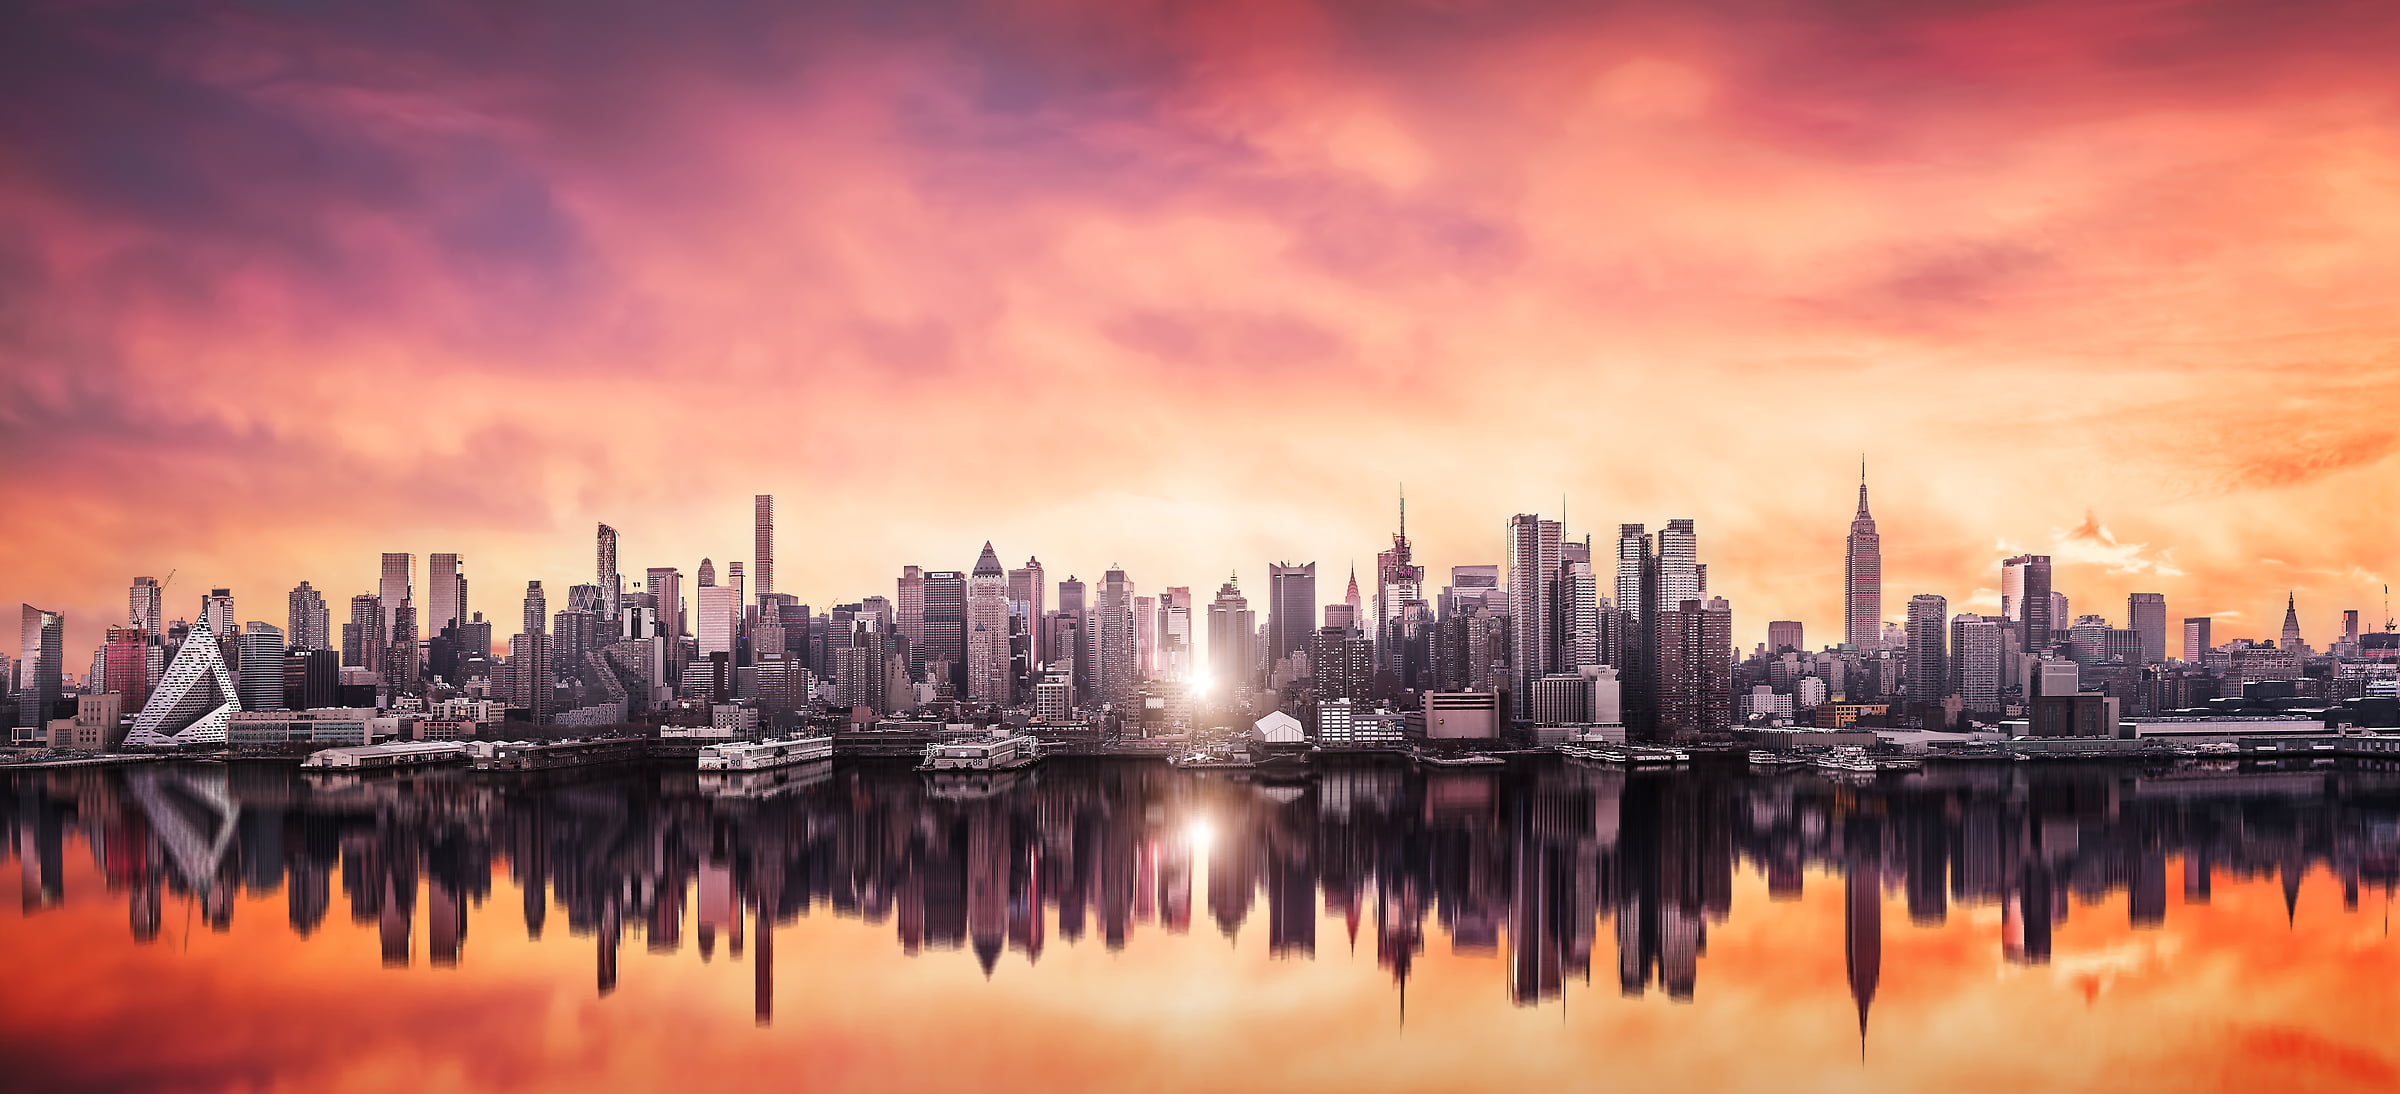 672 megapixels! A very high definition cityscape VAST photo of Manhattanhenge sunrise among the Midtown Manhattan city skyline skyscrapers; created in New York City by Dan Piech